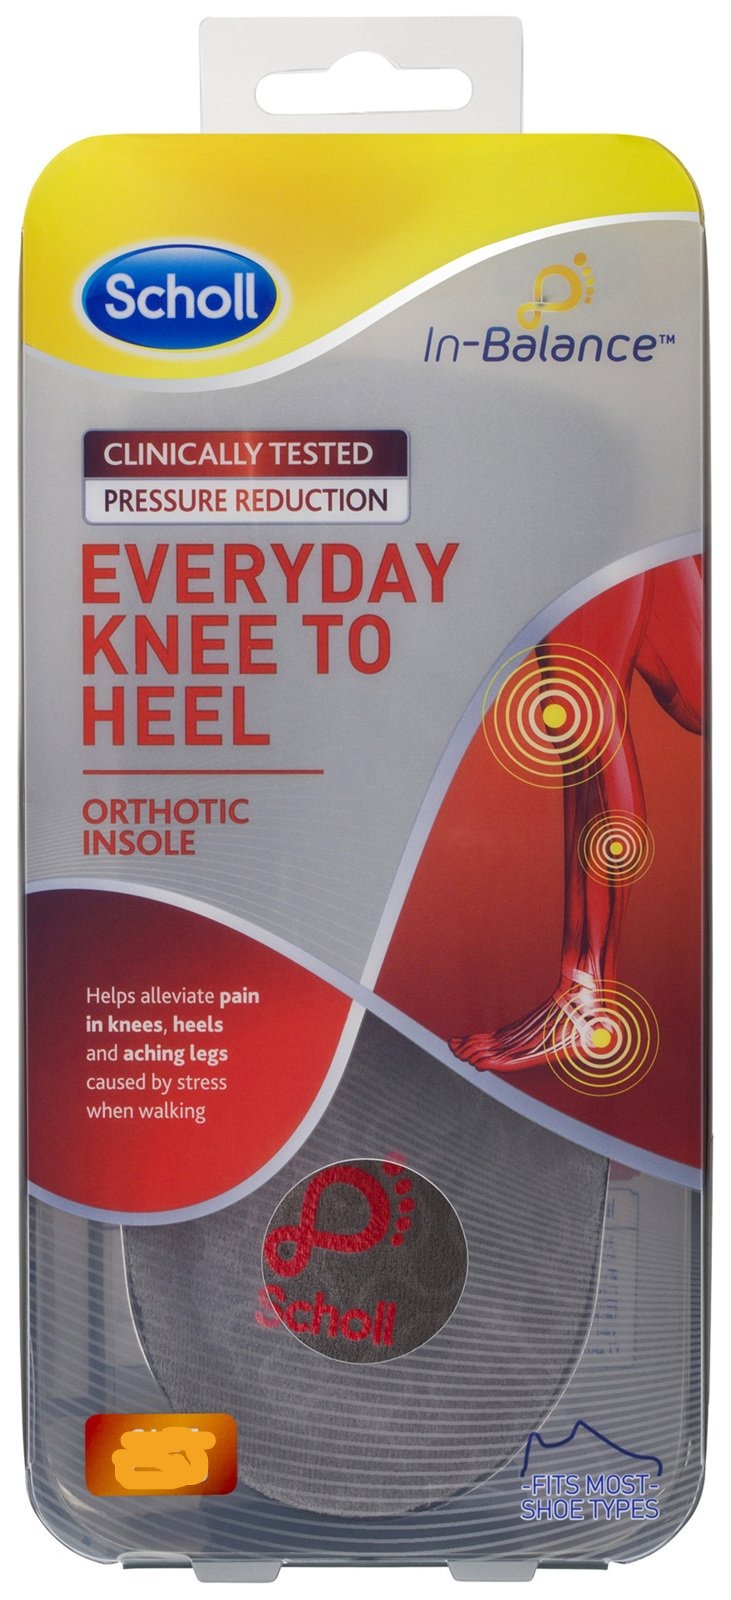 Scholl In-balance Everyday Knee to Heel Orthotic Insole Small